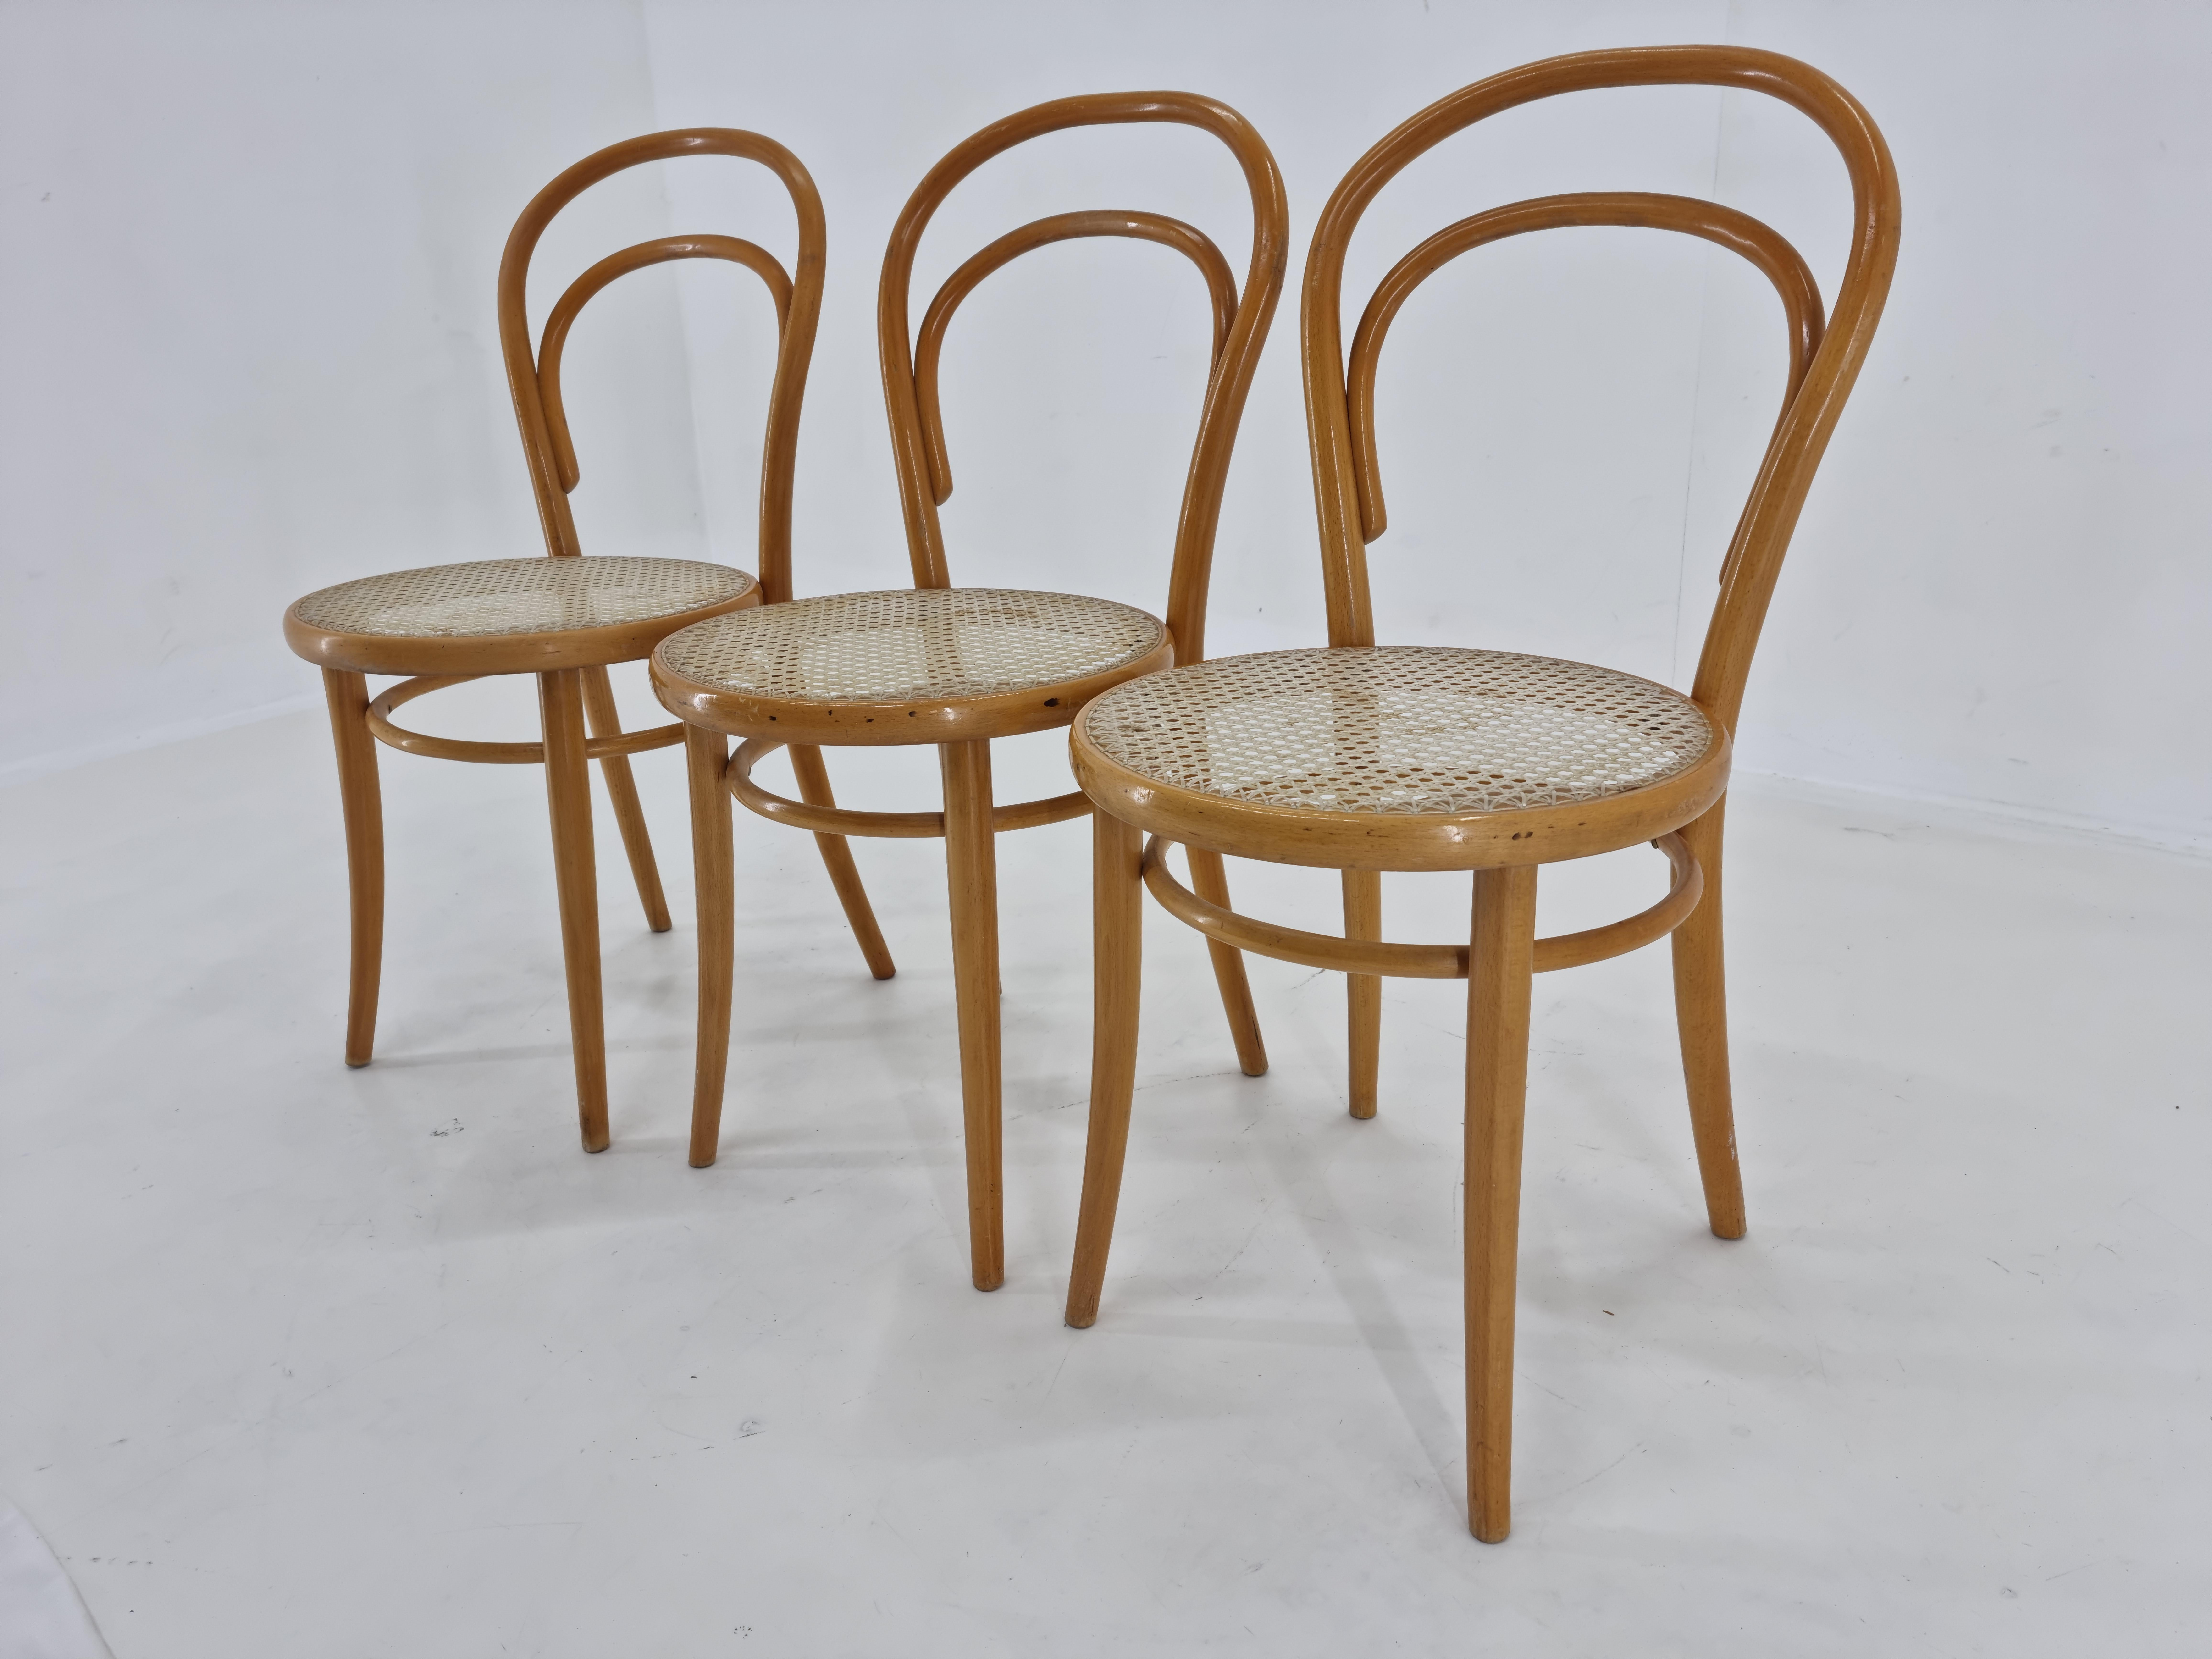 Mid-20th Century Set of Three Bentwood Chairs Nr. 14, Ton, Michael Thonet, 1950s